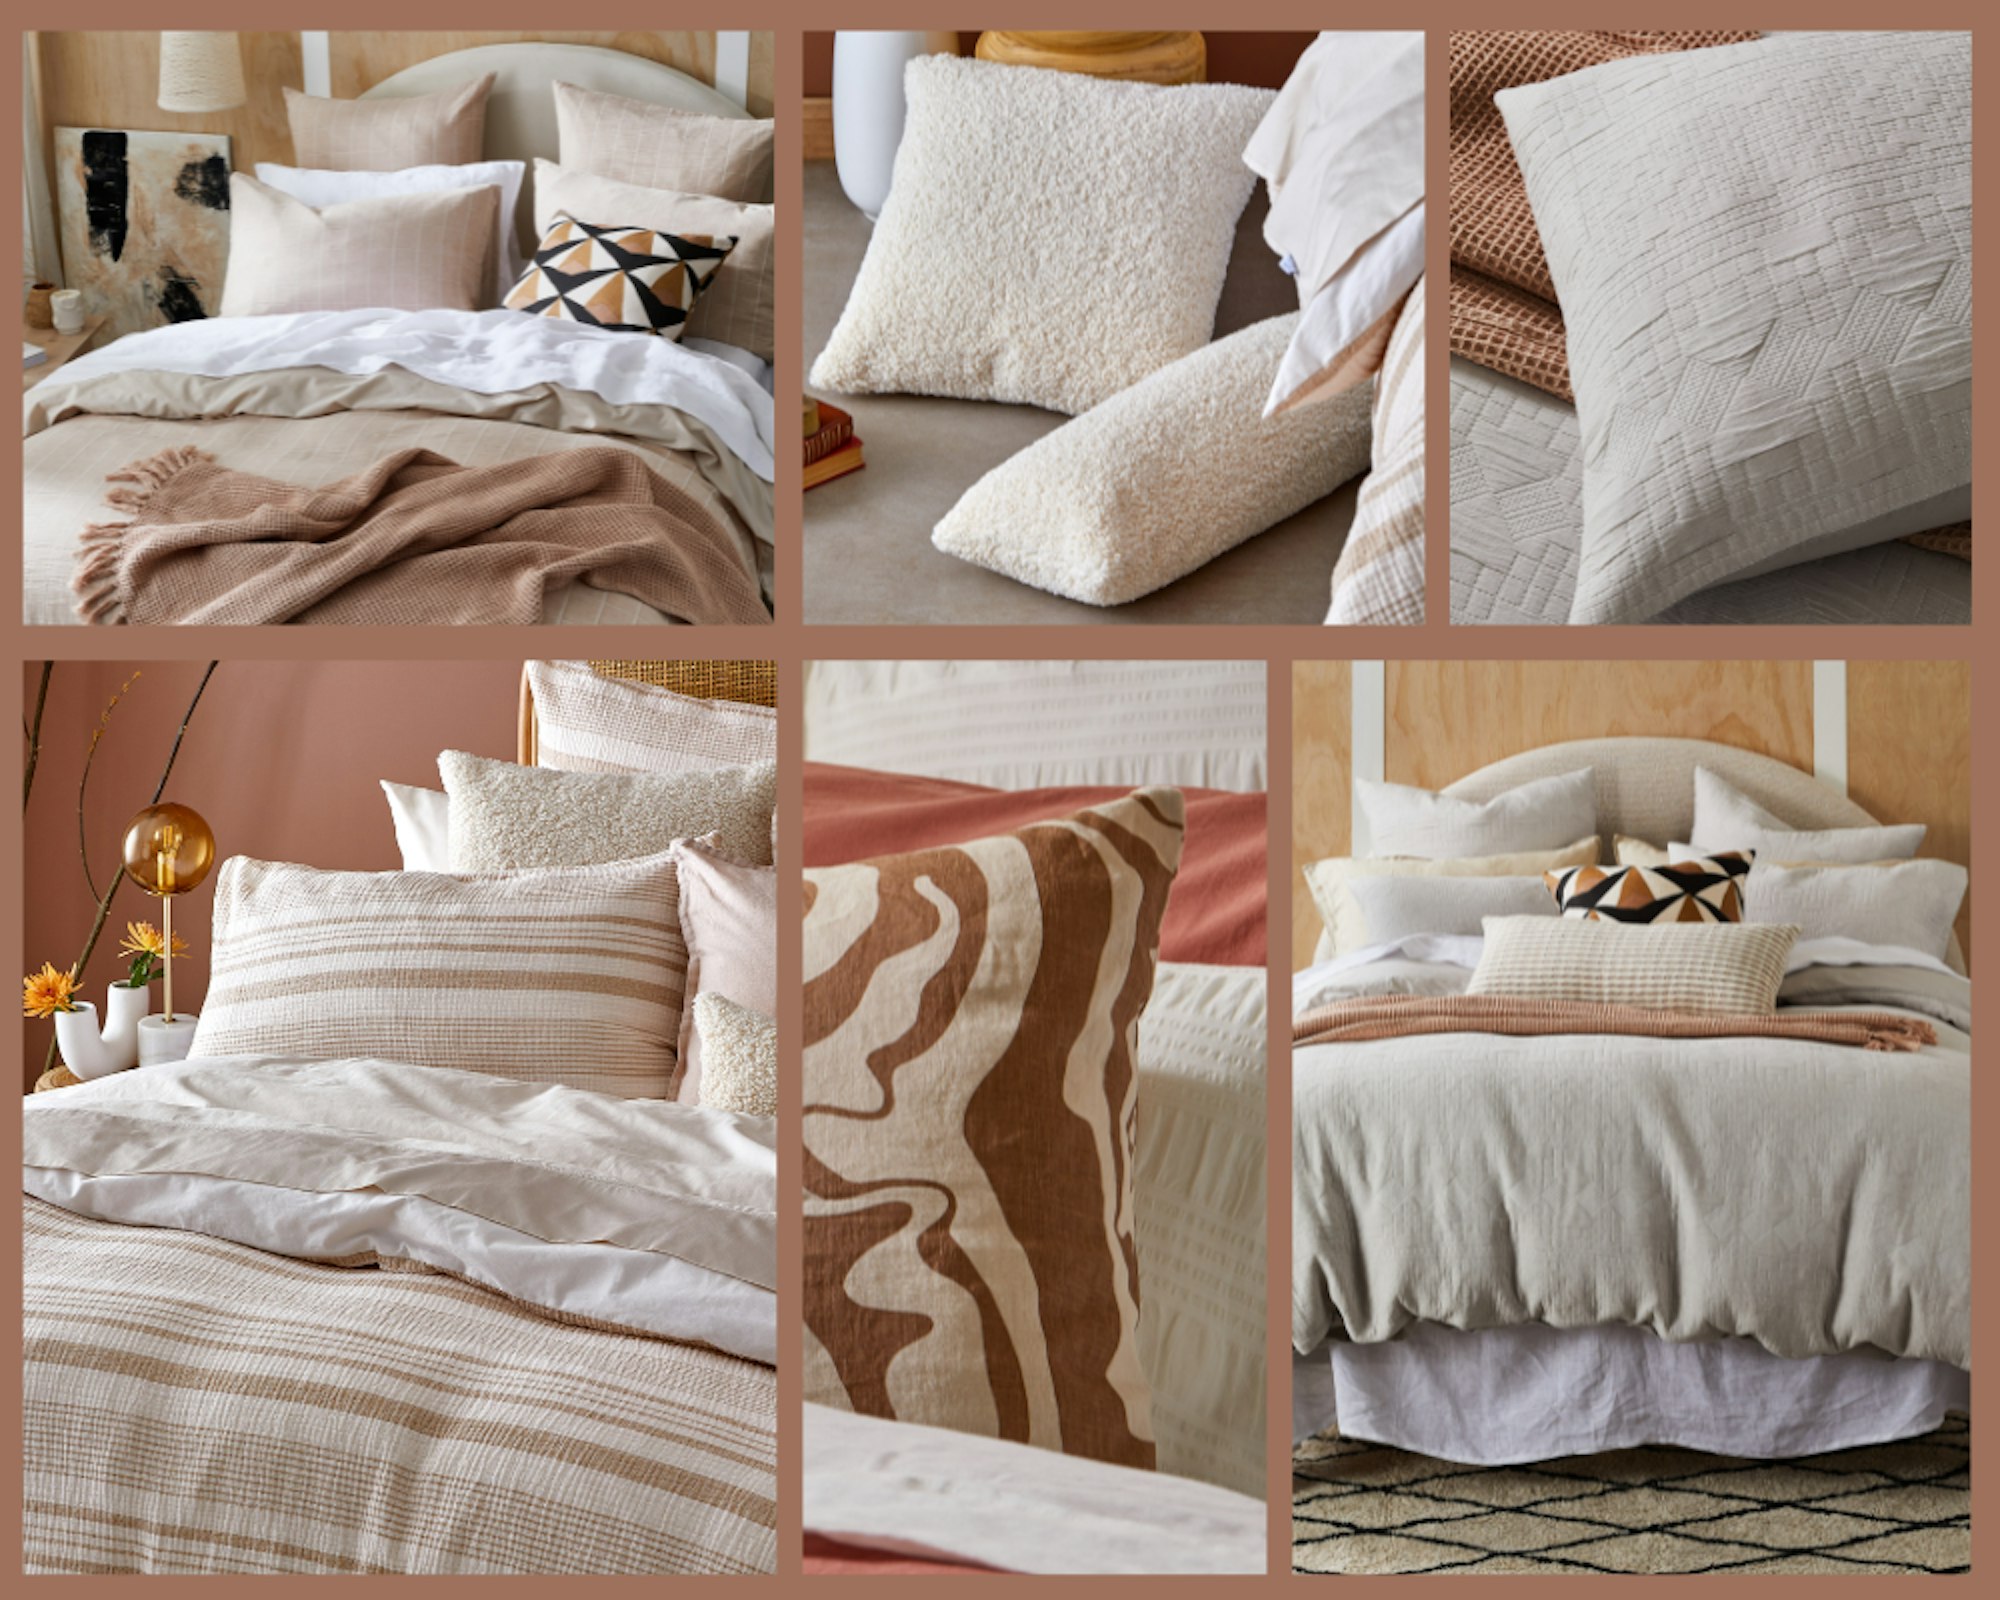 Home Beautiful collection collage of bedding, decor, and homewares